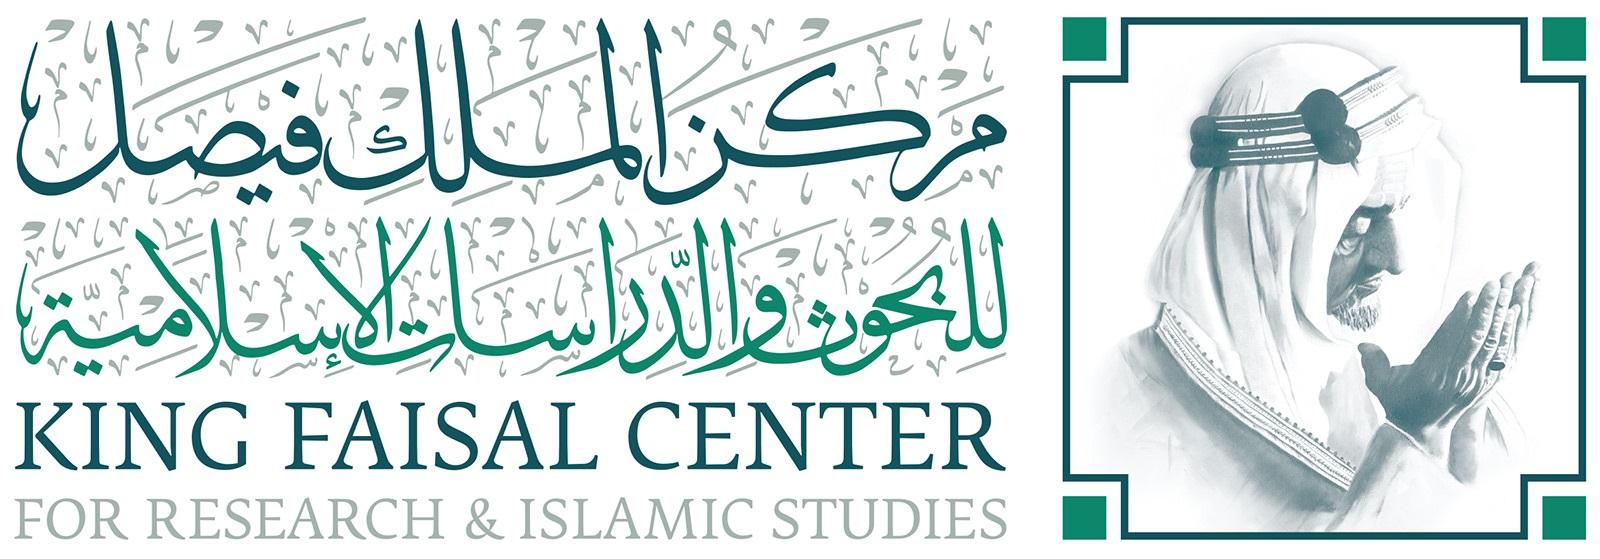 King Faisal Center for Research and Islamic Studies (KFCRIS)